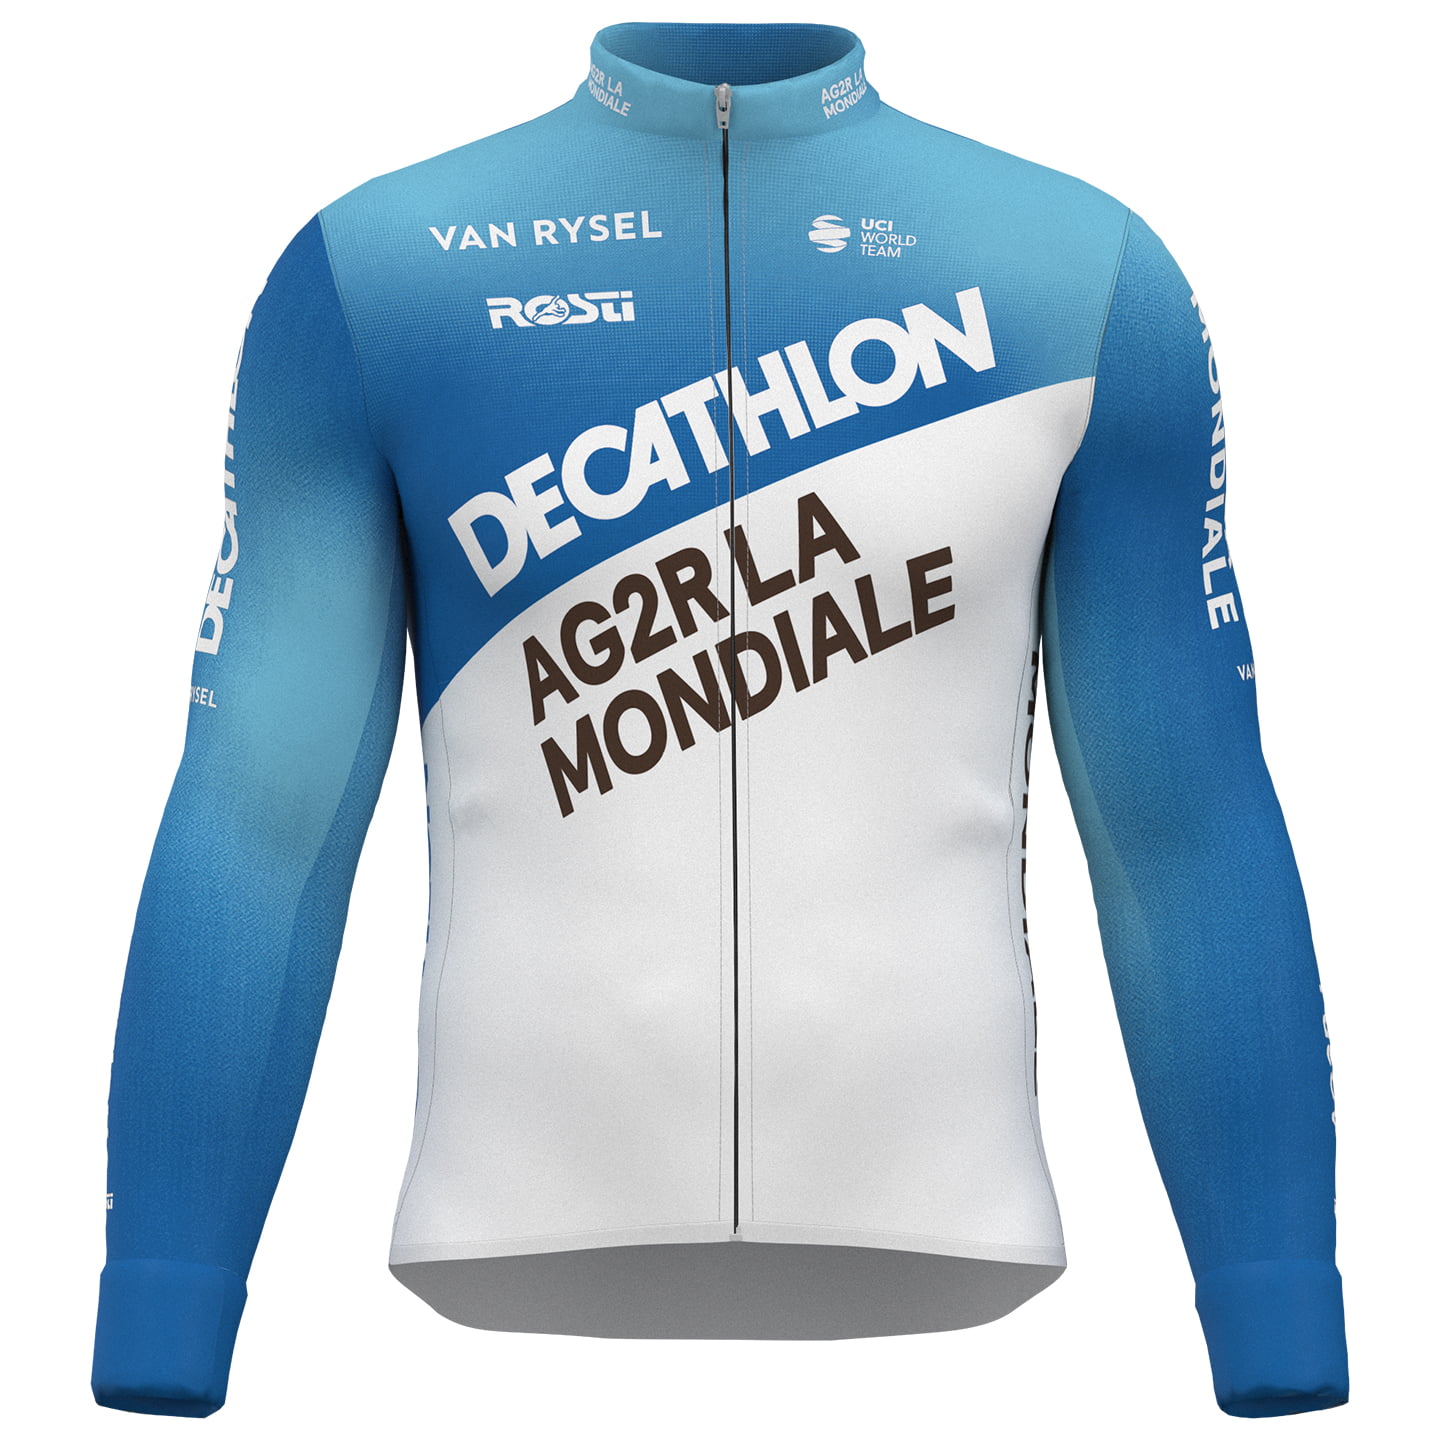 DECATHLON AG2R LA MONDIALE 2024 Long Sleeve Jersey, for men, size S, Cycling jersey, Cycling clothing